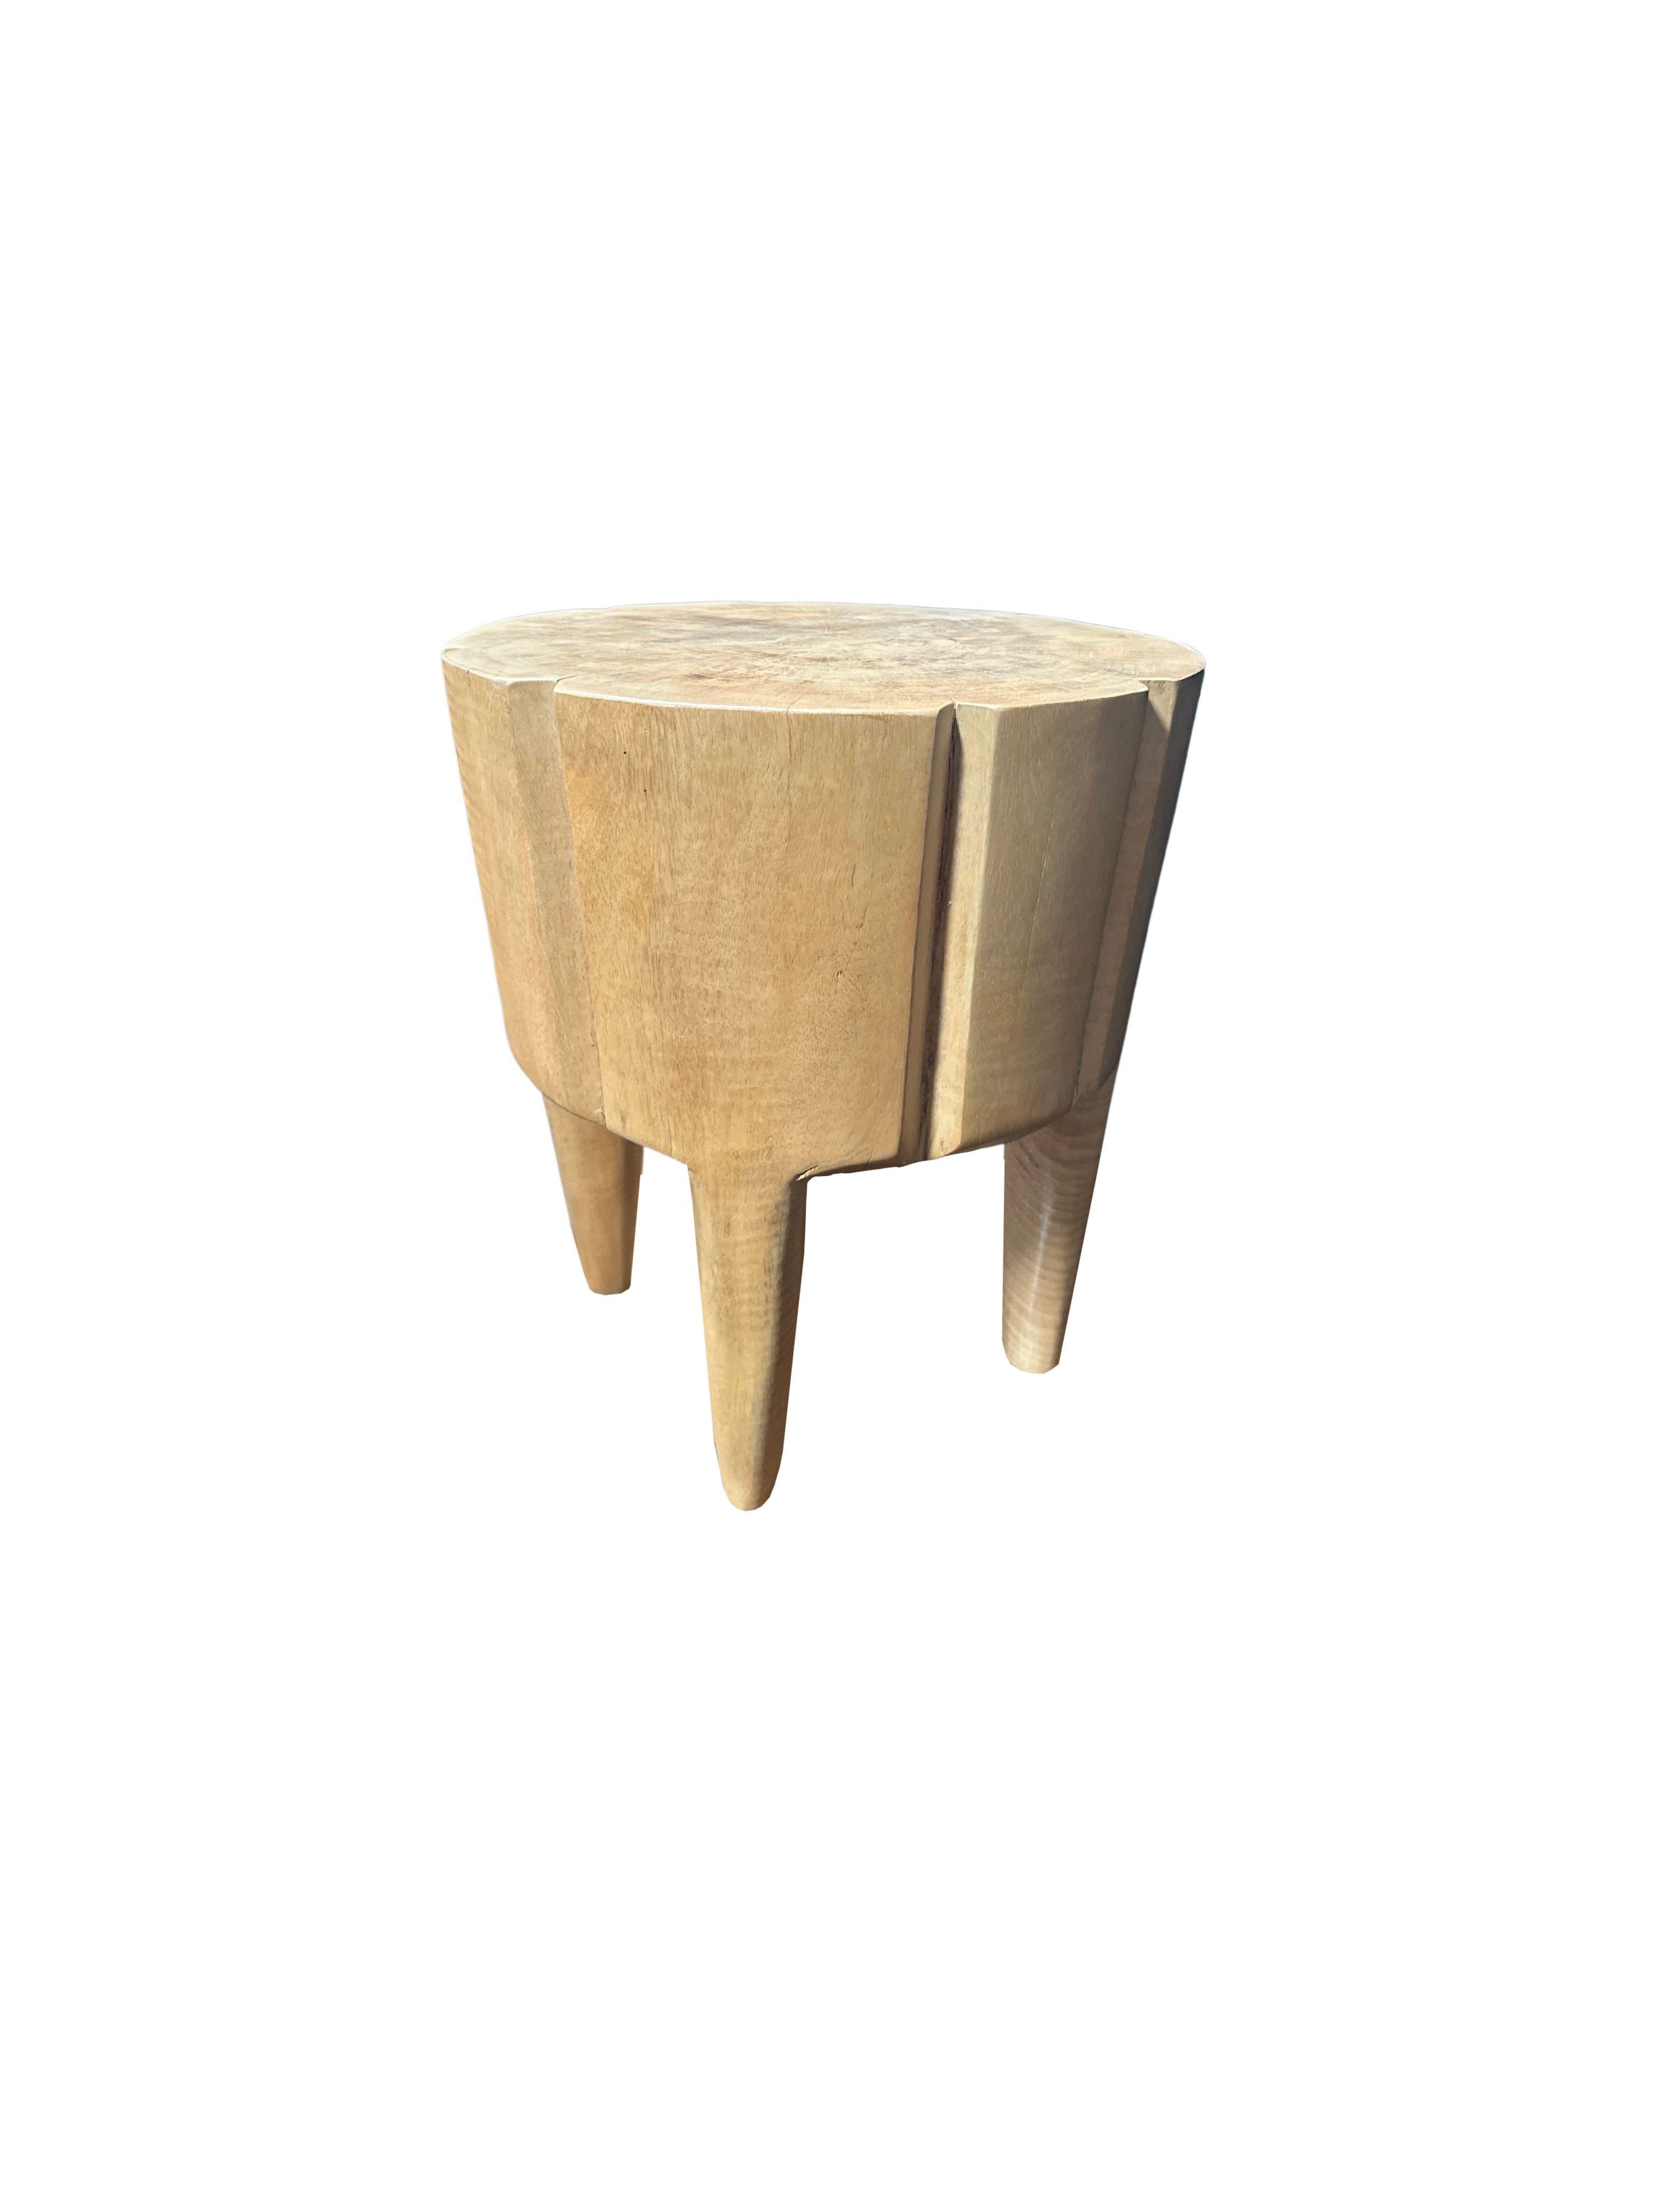 Hand-Crafted Sculptural Side Table Mango Wood Natural Finish For Sale